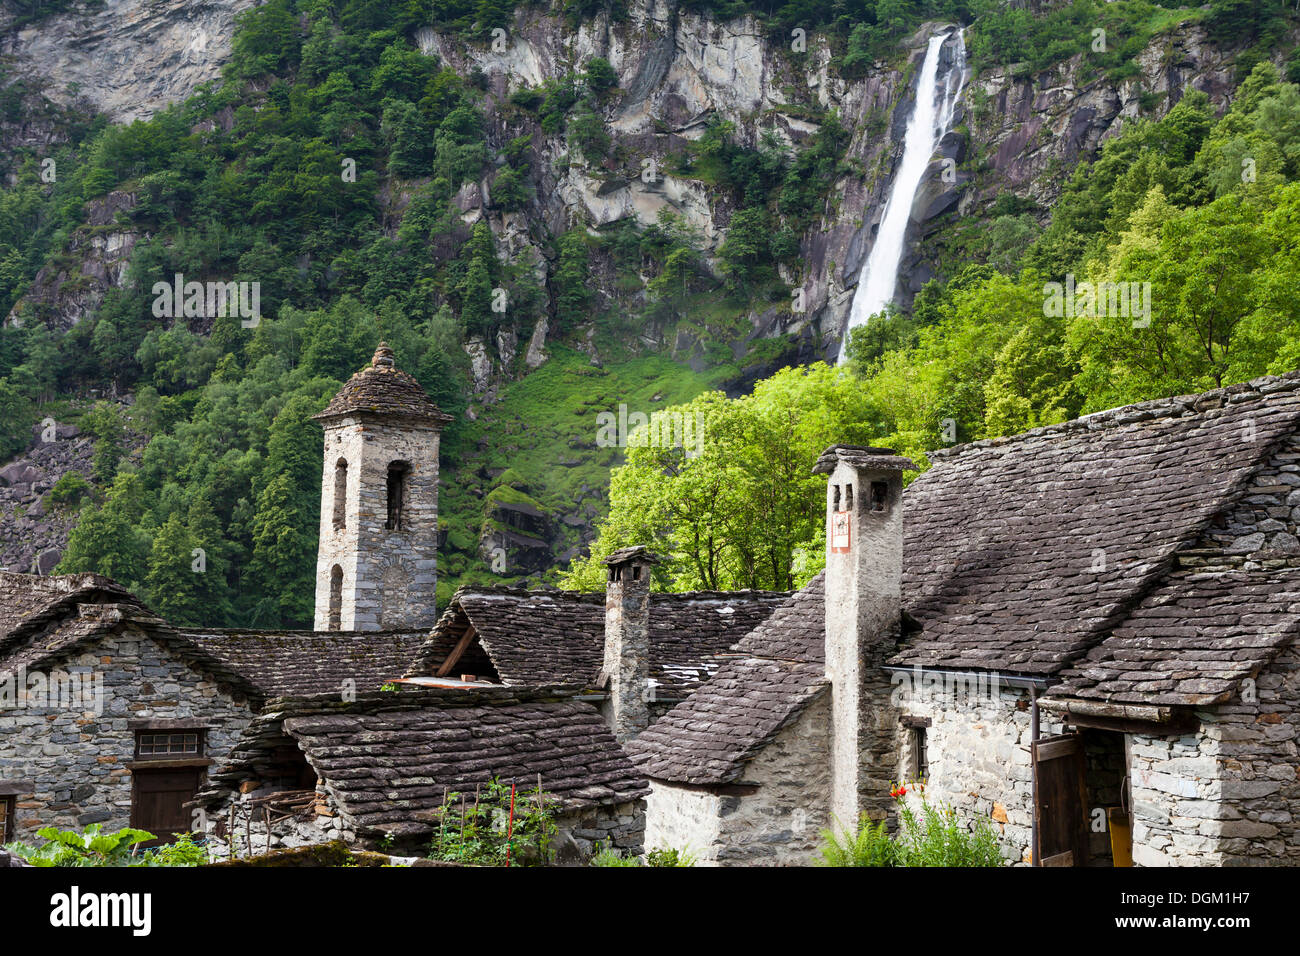 Hamlet of Foroglio with a waterfall in the Bavona Valley, Valle Maggia, Ticino, Switzerland, Europe Stock Photo